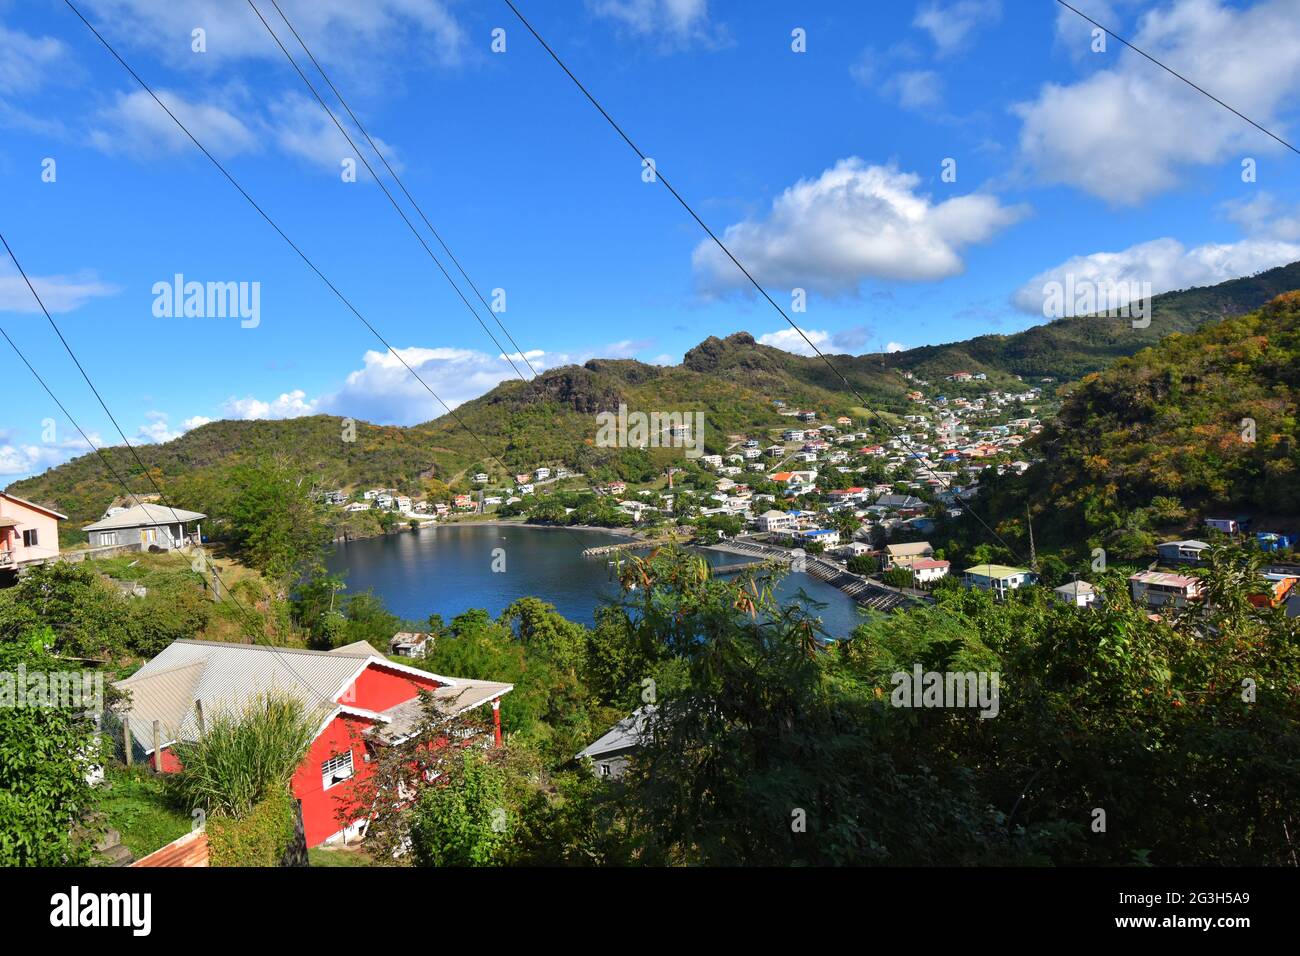 Barrouallie, St. Vincent and the Grenadines- January 5th, 2020: View of the Community of Barrouallie, St. Vincent. Stock Photo